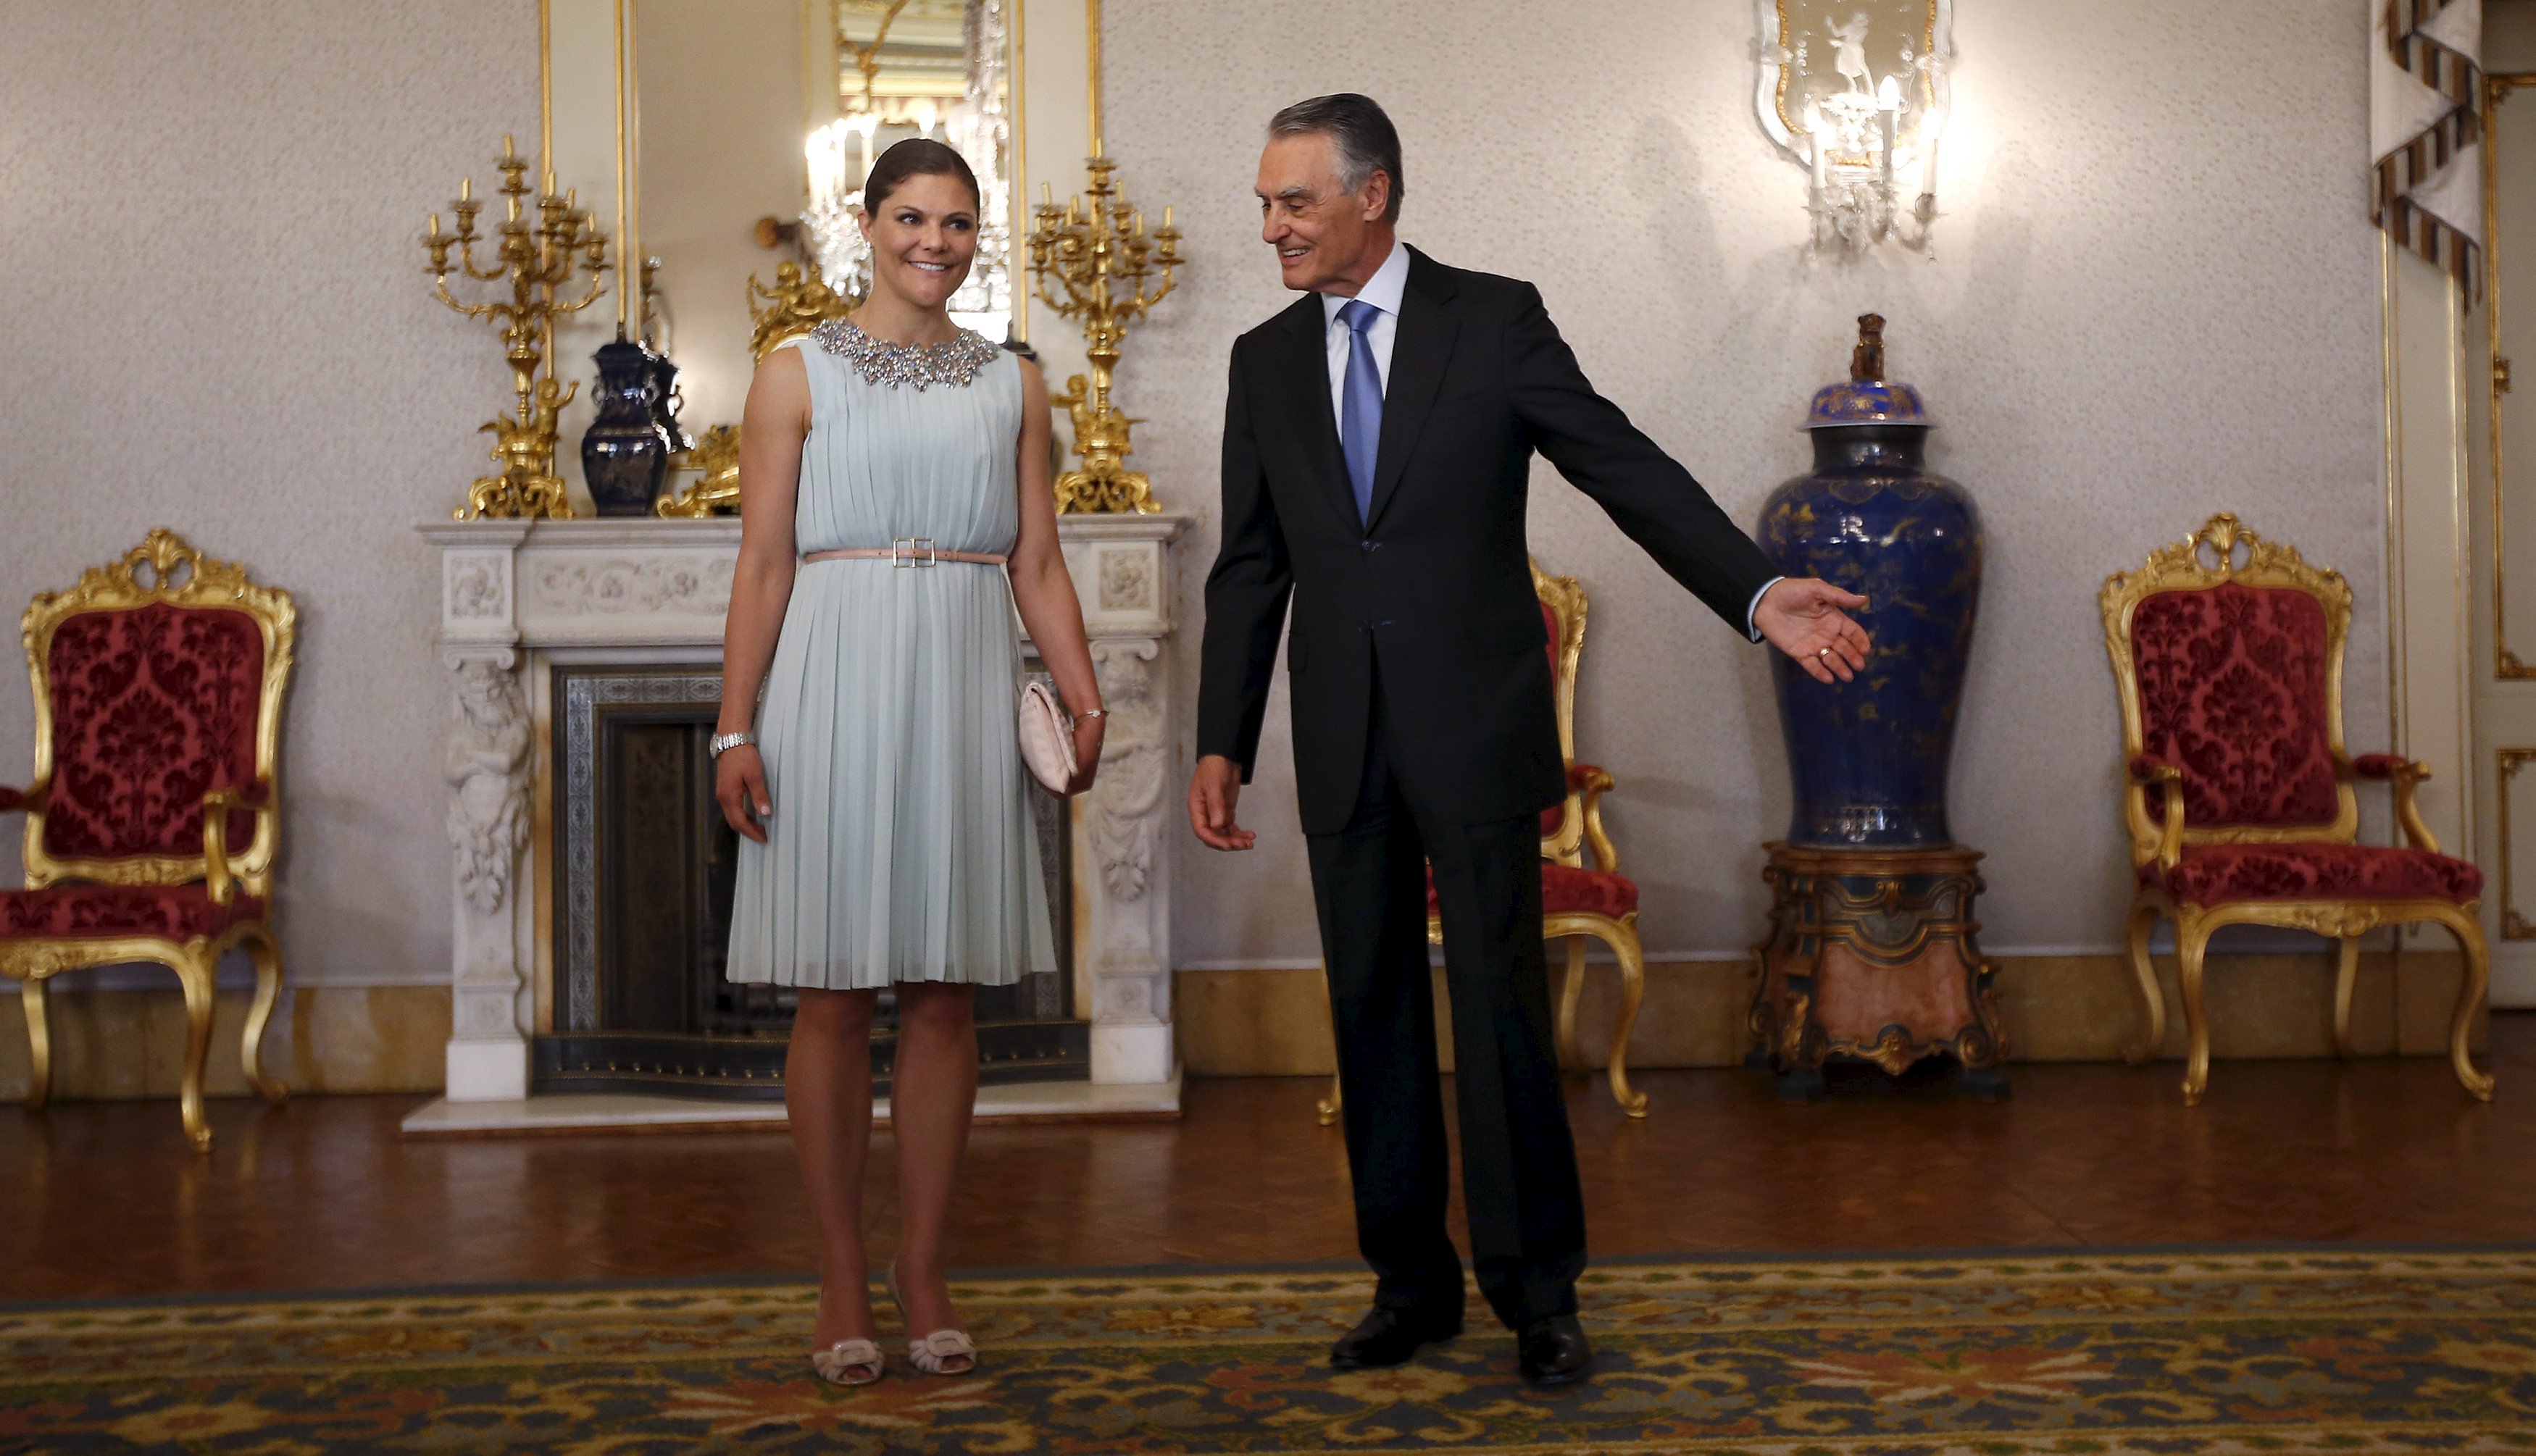 Sweden's Crown Princess Victoria is welcomed by Portugal's President Anibal Cavaco Silva during a meeting at Belem presidential palace in Lisbon, Portugal June 5, 2015.   REUTERS/Rafael Marchante